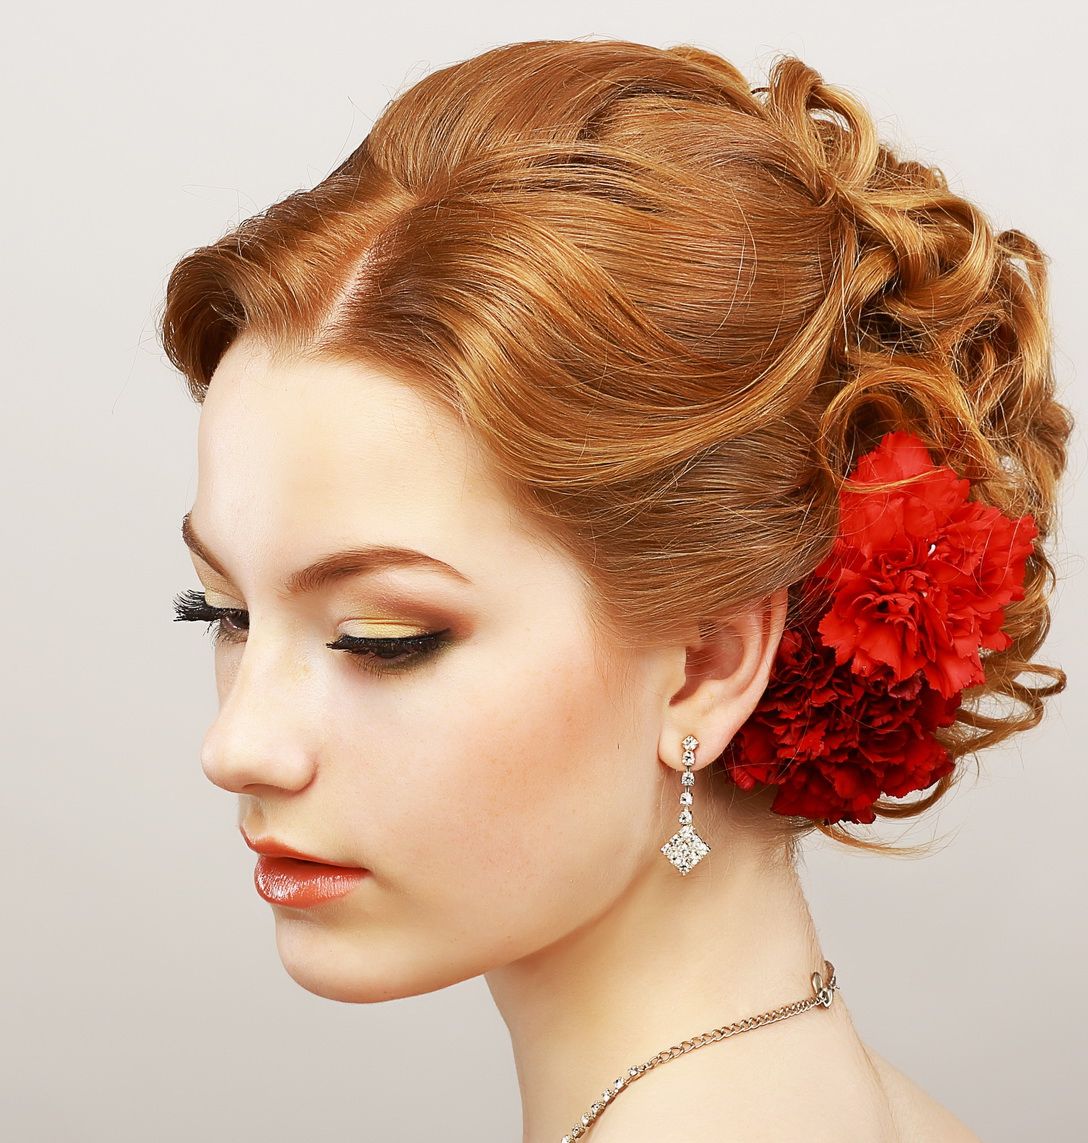 16 Easy Prom Hairstyles For Short And Medium Length Hair In Popular Curled Floral Prom Updos (View 6 of 20)